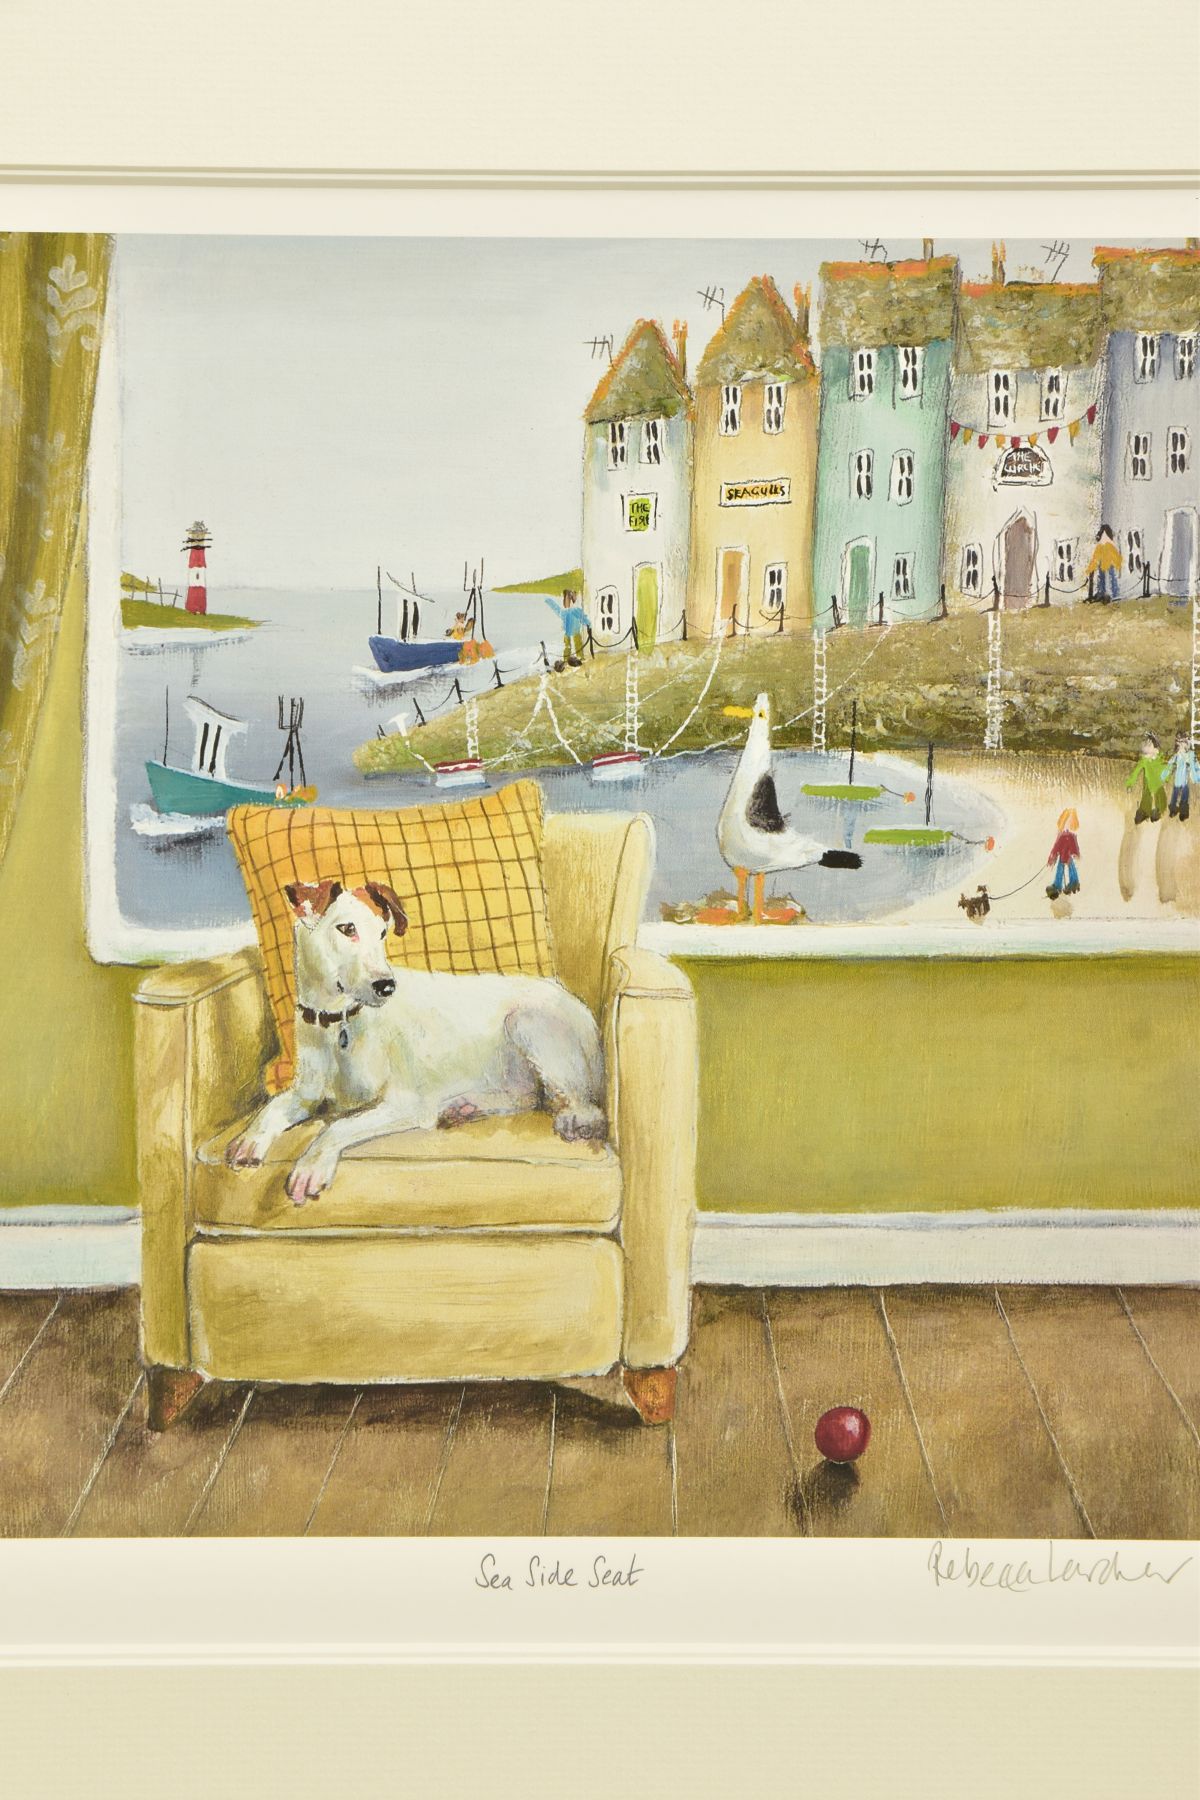 REBECCA LARDNER (BRITISH 1971) 'SEASIDE SEAT' a limited edition print of a dog on a chair 58/195, - Image 2 of 10